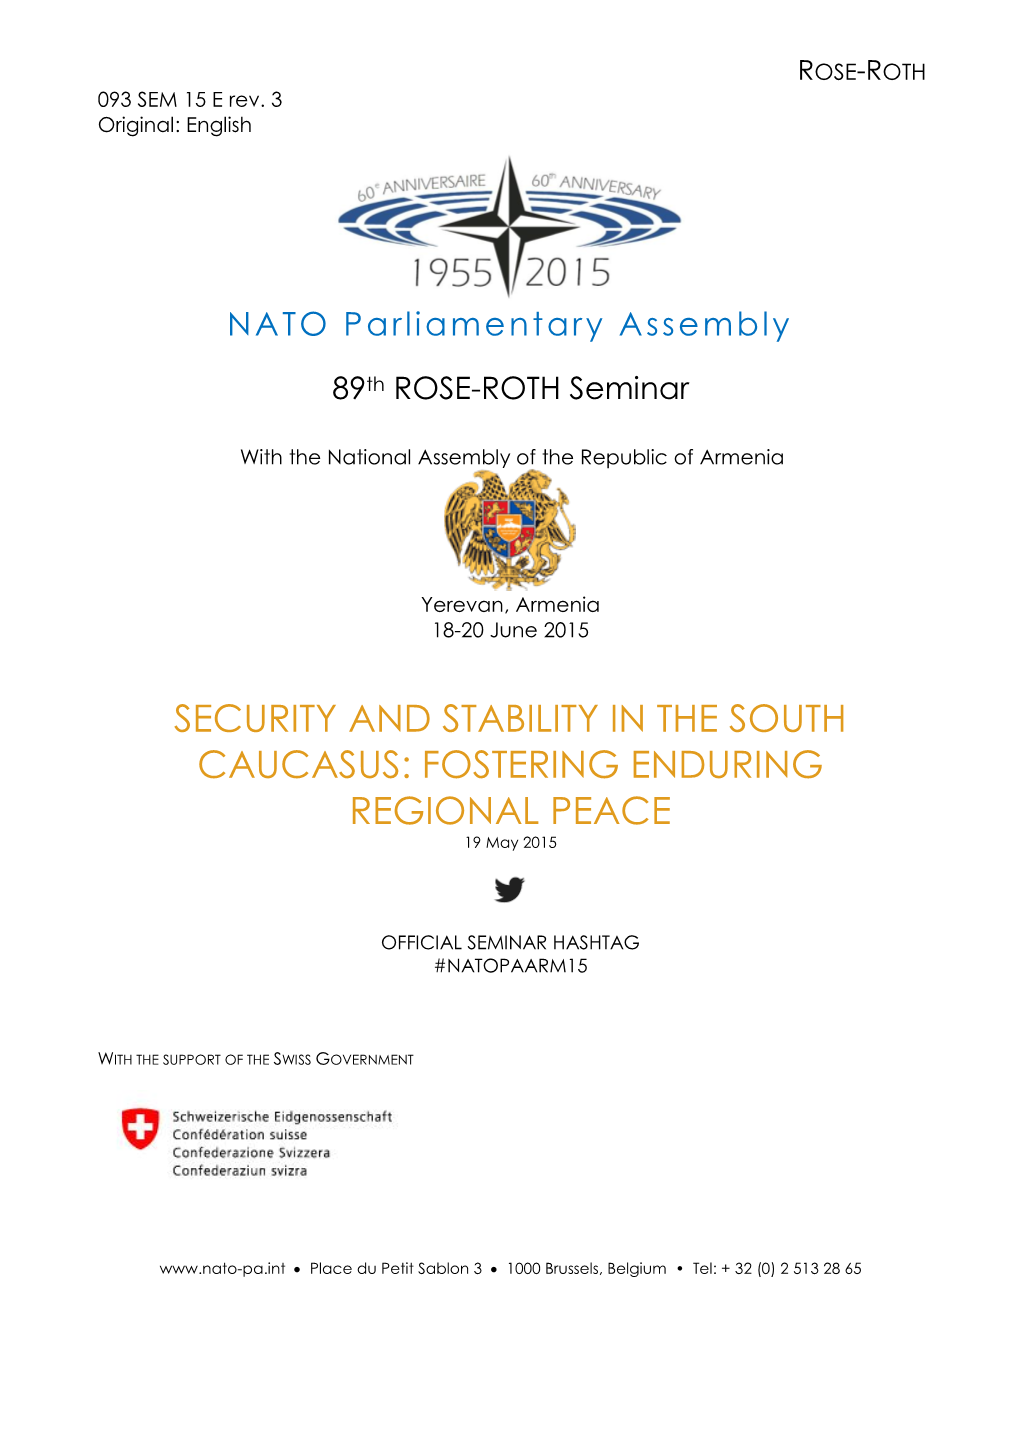 SECURITY and STABILITY in the SOUTH CAUCASUS: FOSTERING ENDURING REGIONAL PEACE 19 May 2015